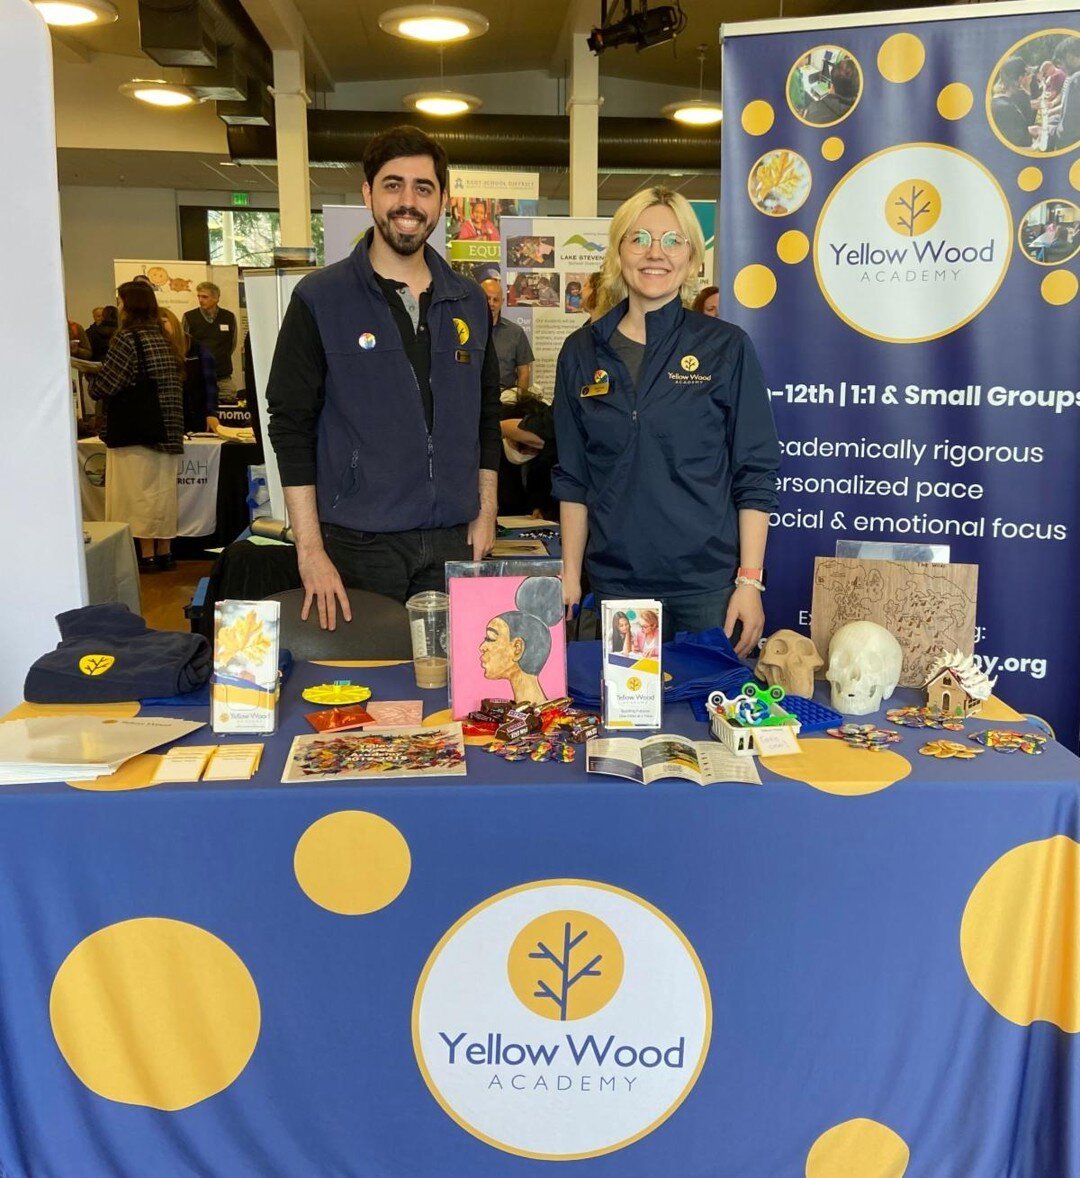 Thinking about teaching with us next year? We have a team attending different career fairs in the area looking for great candidates to join our team. Our administrators Kaia Lind and Andrew Bennett attended the WWU career fair at the beginning of Mar